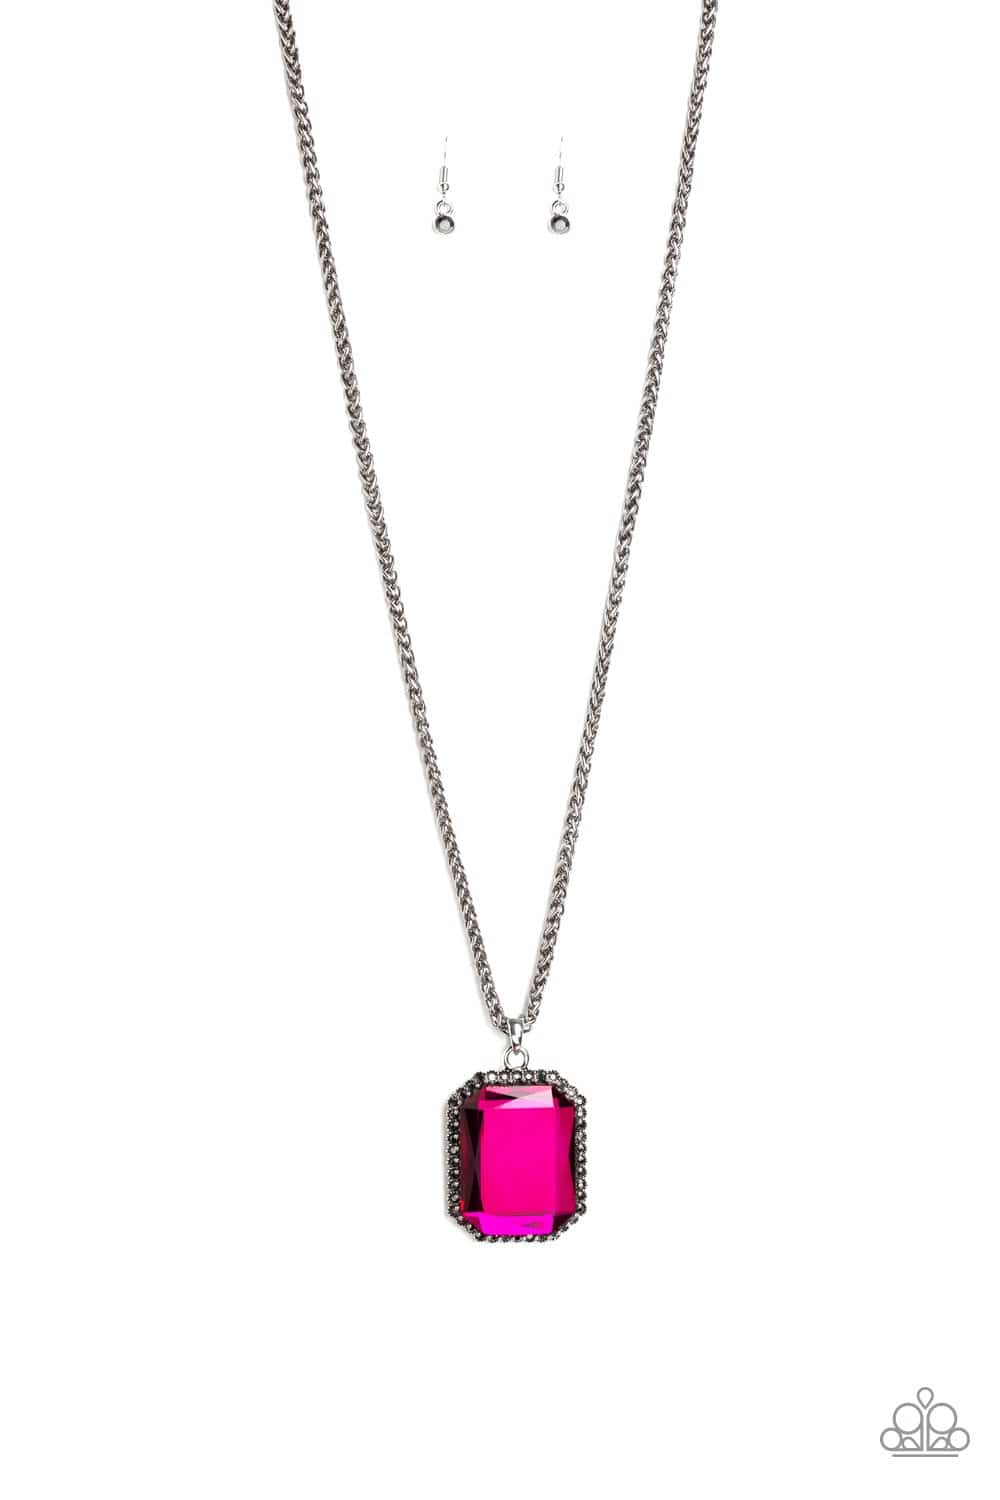 Let Your HEIR Down - Pink Rhinestone Necklace - Paparazzi Accessories - GlaMarous Titi Jewels